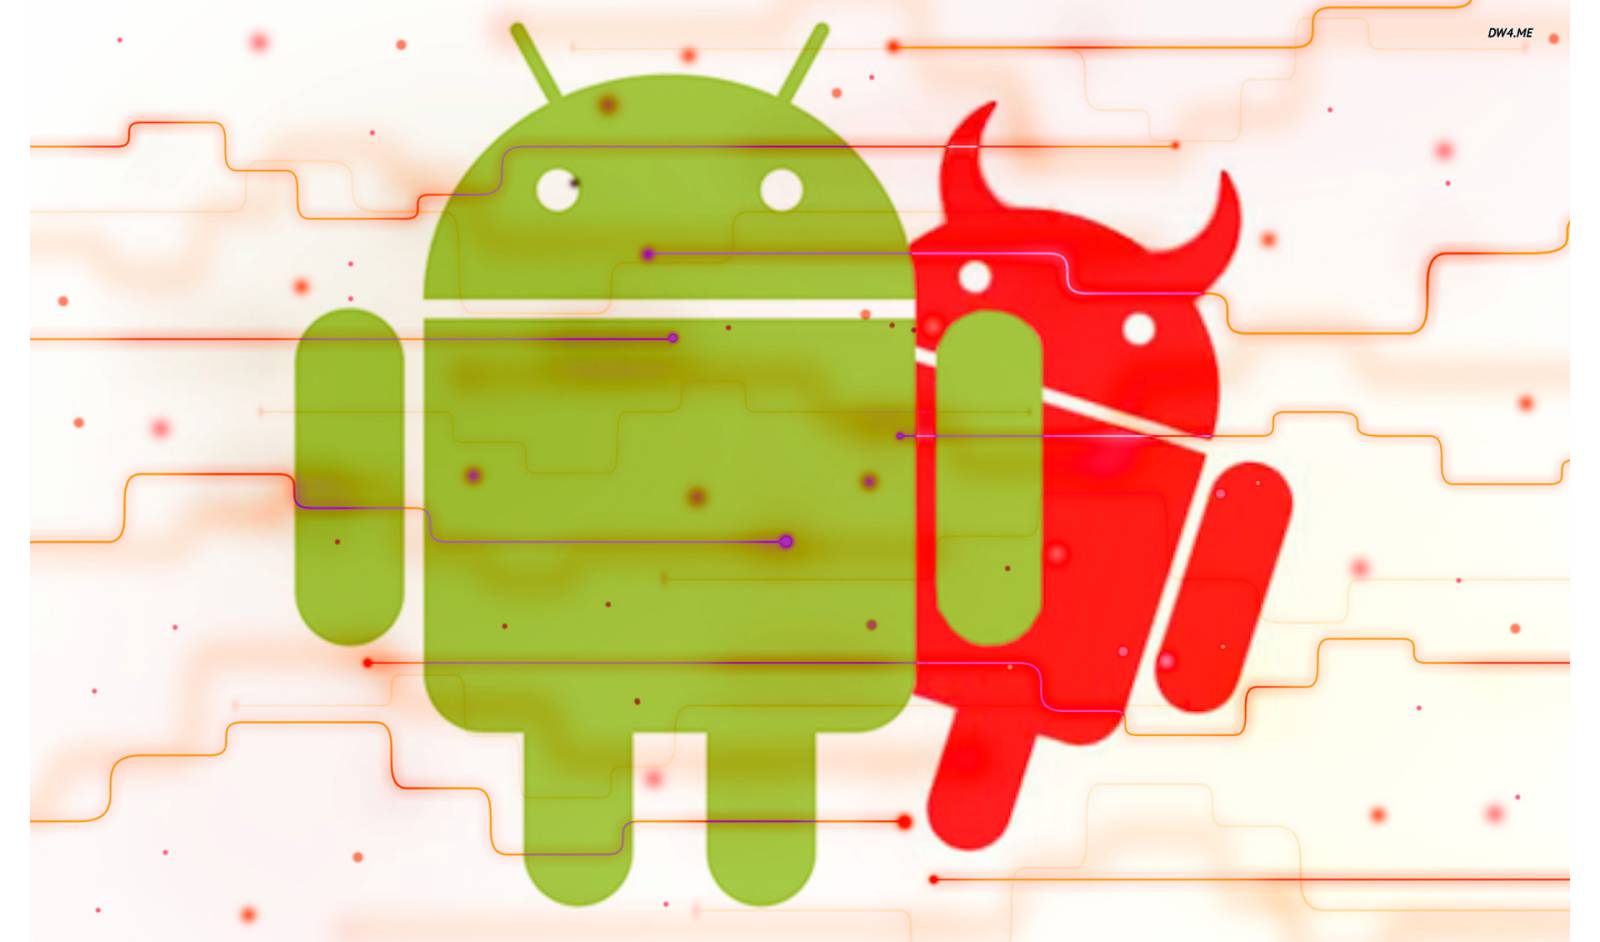 Android. Very BAD function that will ANGRY you